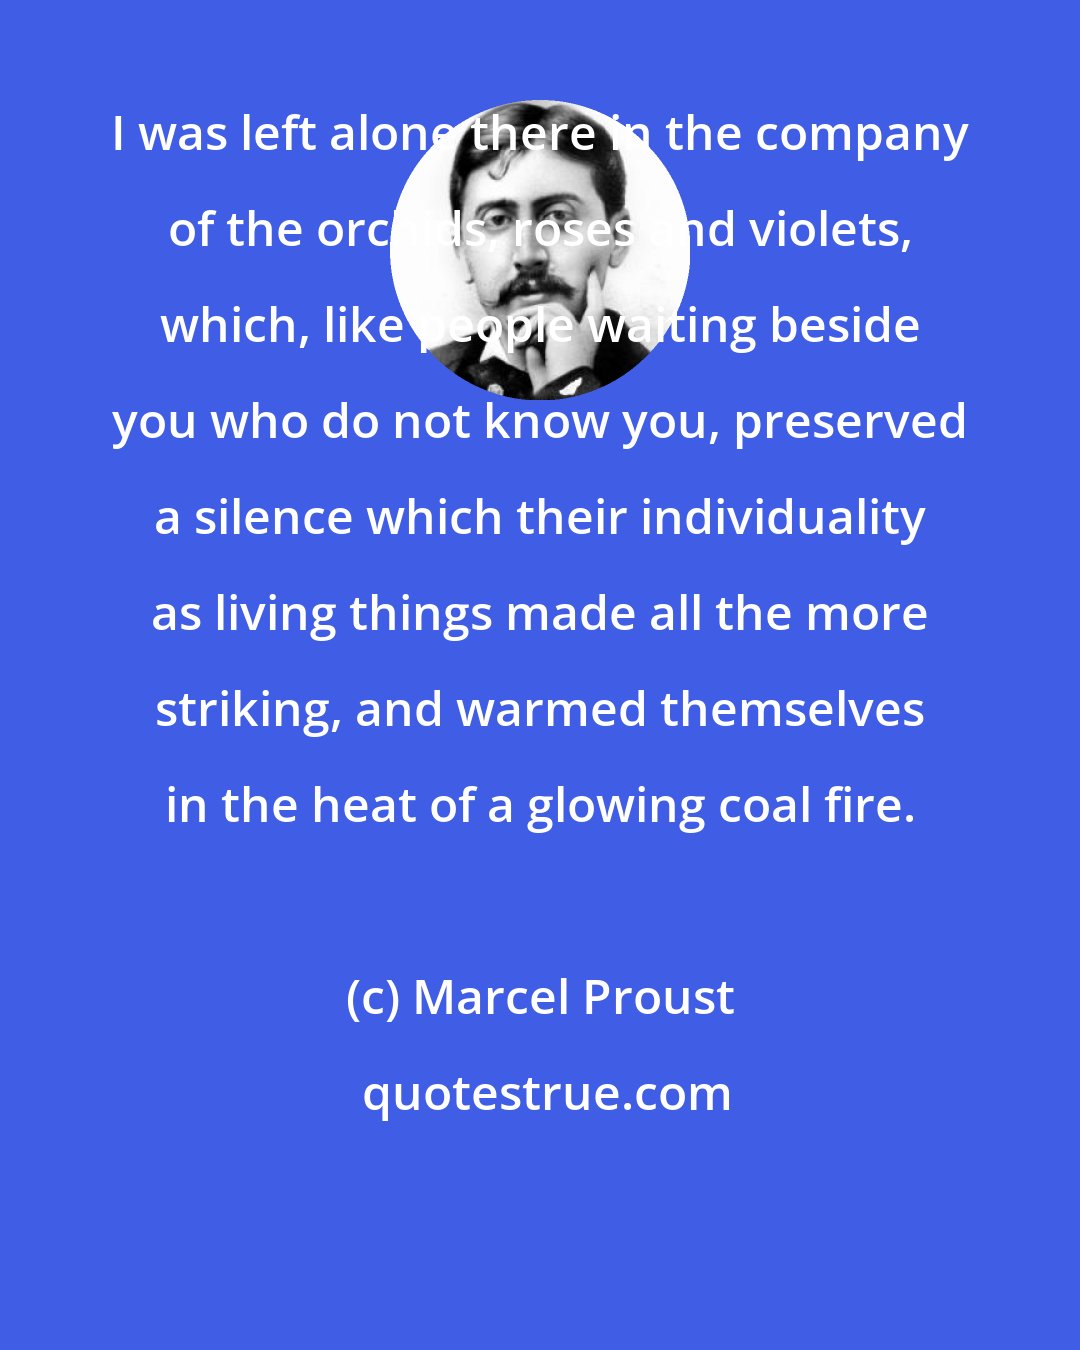 Marcel Proust: I was left alone there in the company of the orchids, roses and violets, which, like people waiting beside you who do not know you, preserved a silence which their individuality as living things made all the more striking, and warmed themselves in the heat of a glowing coal fire.